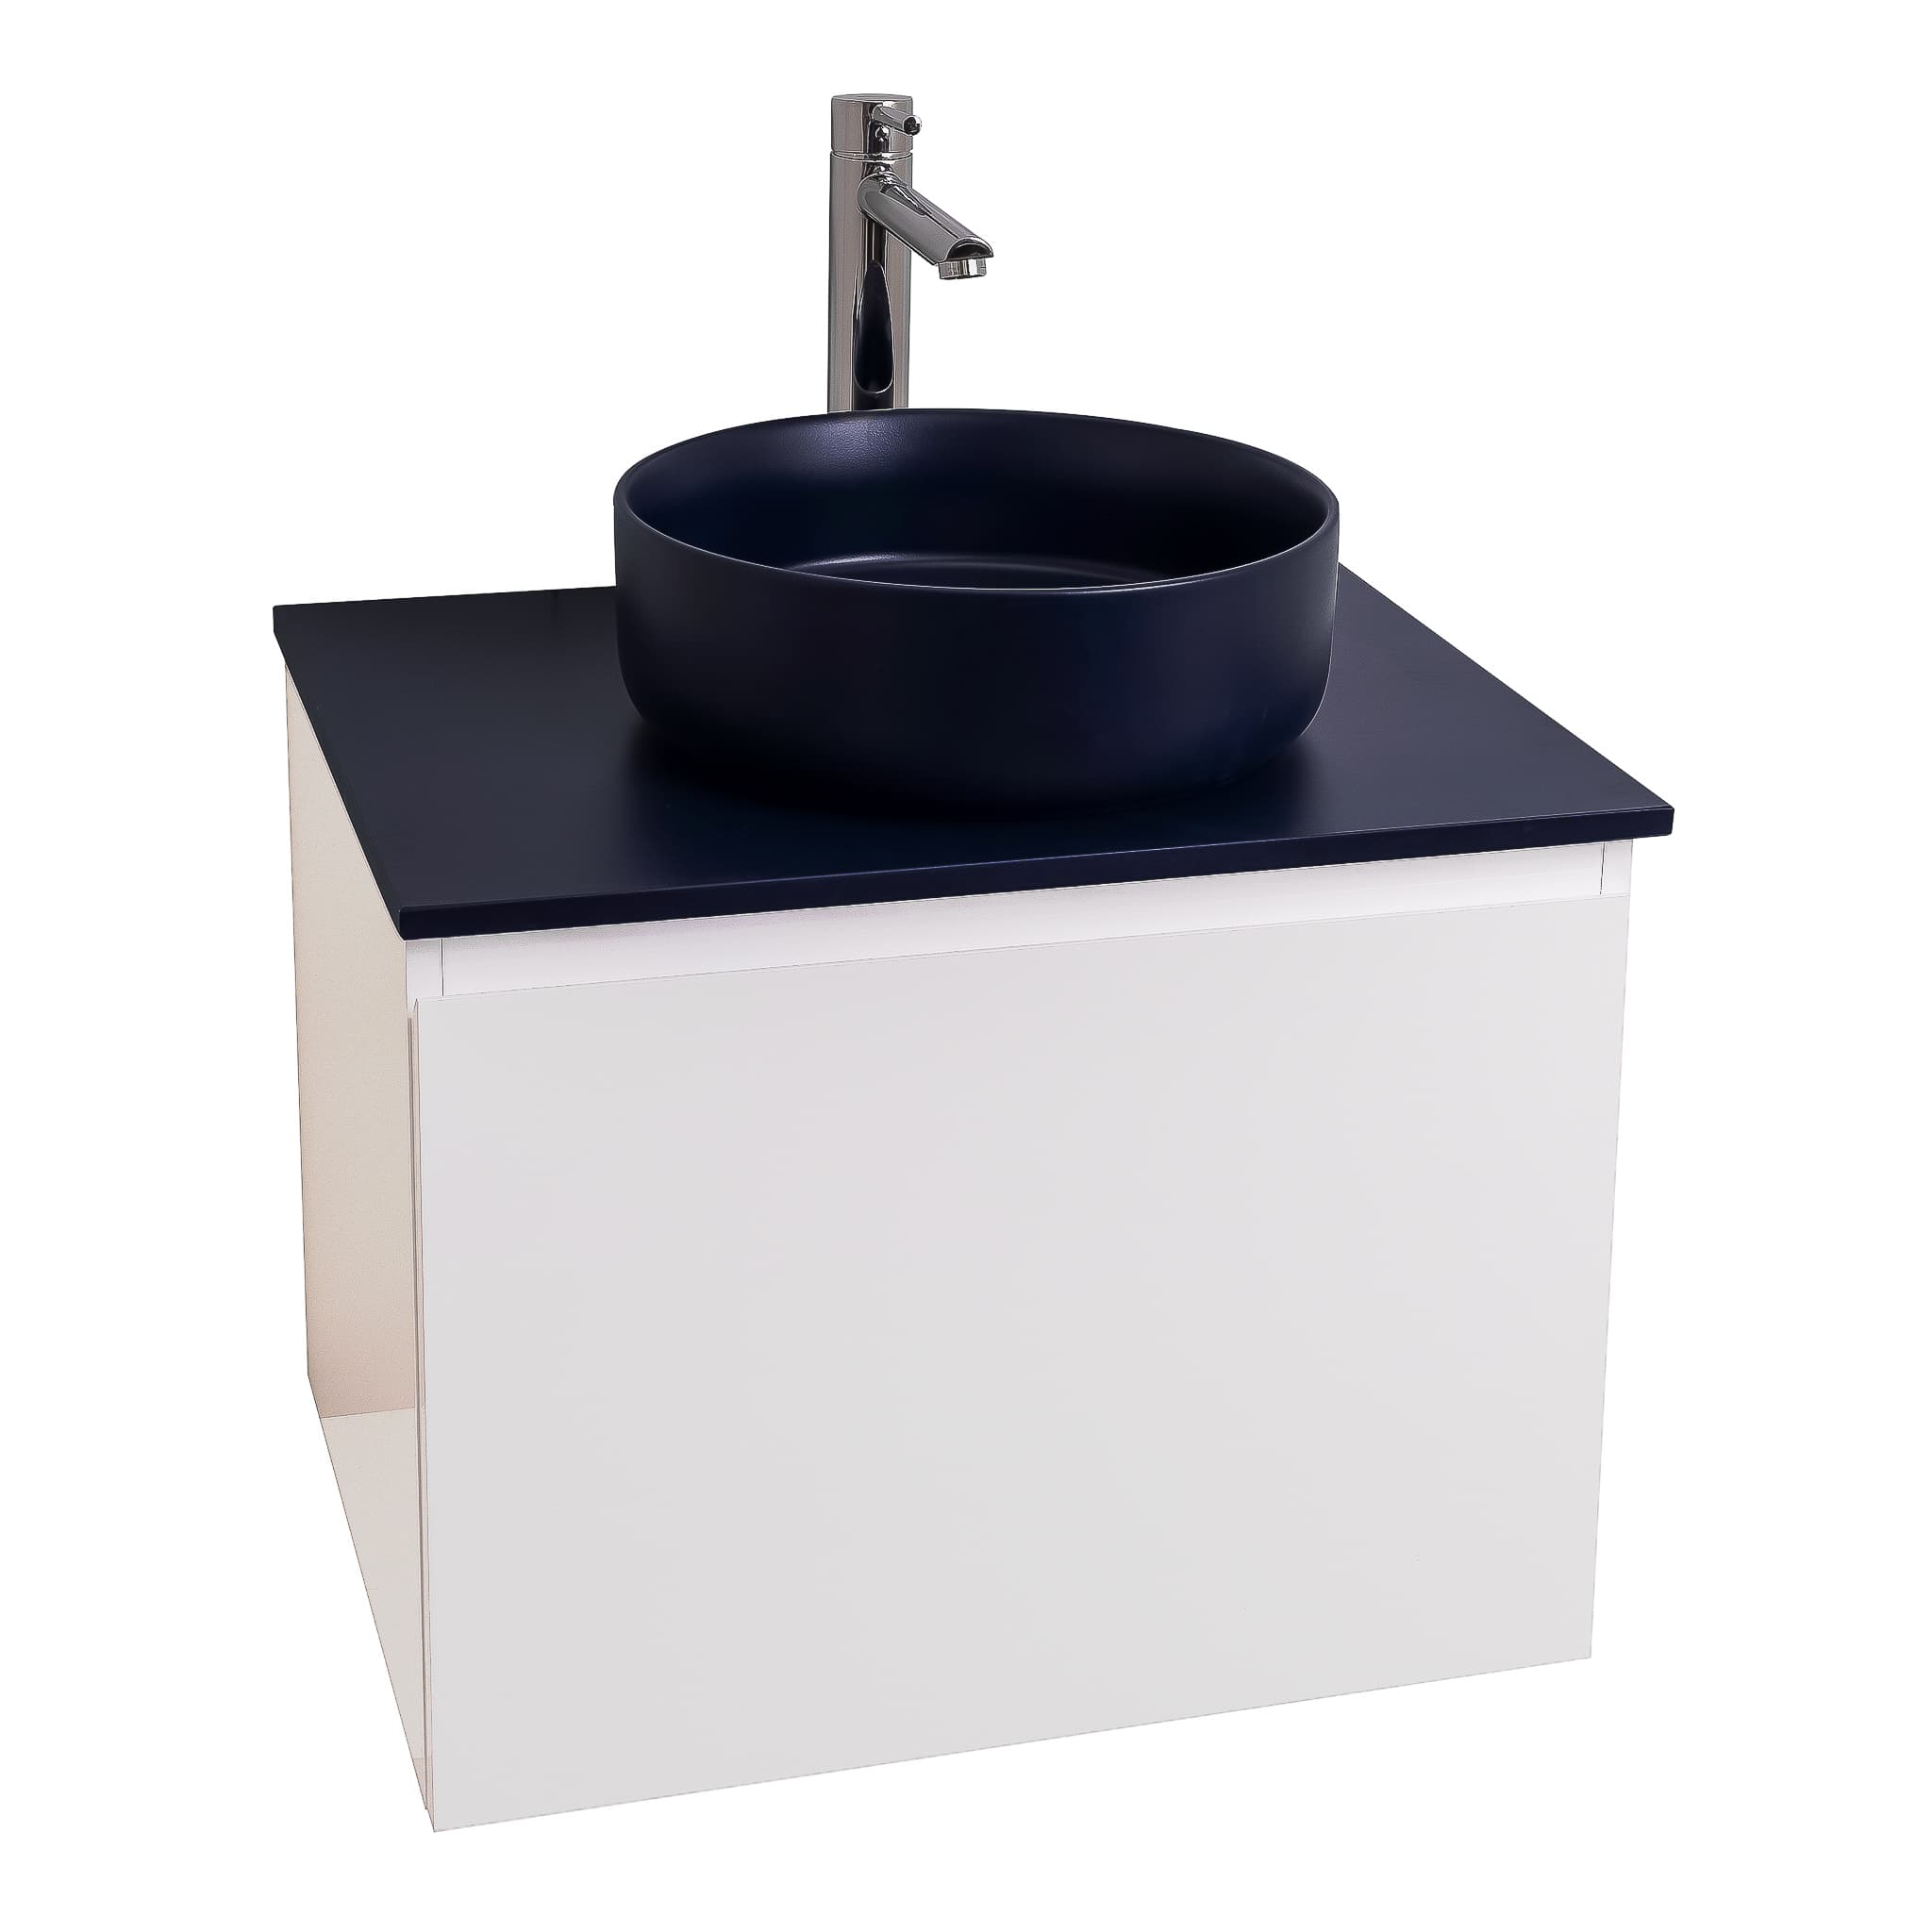 Venice 23.5 White High Gloss Cabinet, Ares Navy Blue Top And Ares Navy Blue Ceramic Basin, Wall Mounted Modern Vanity Set